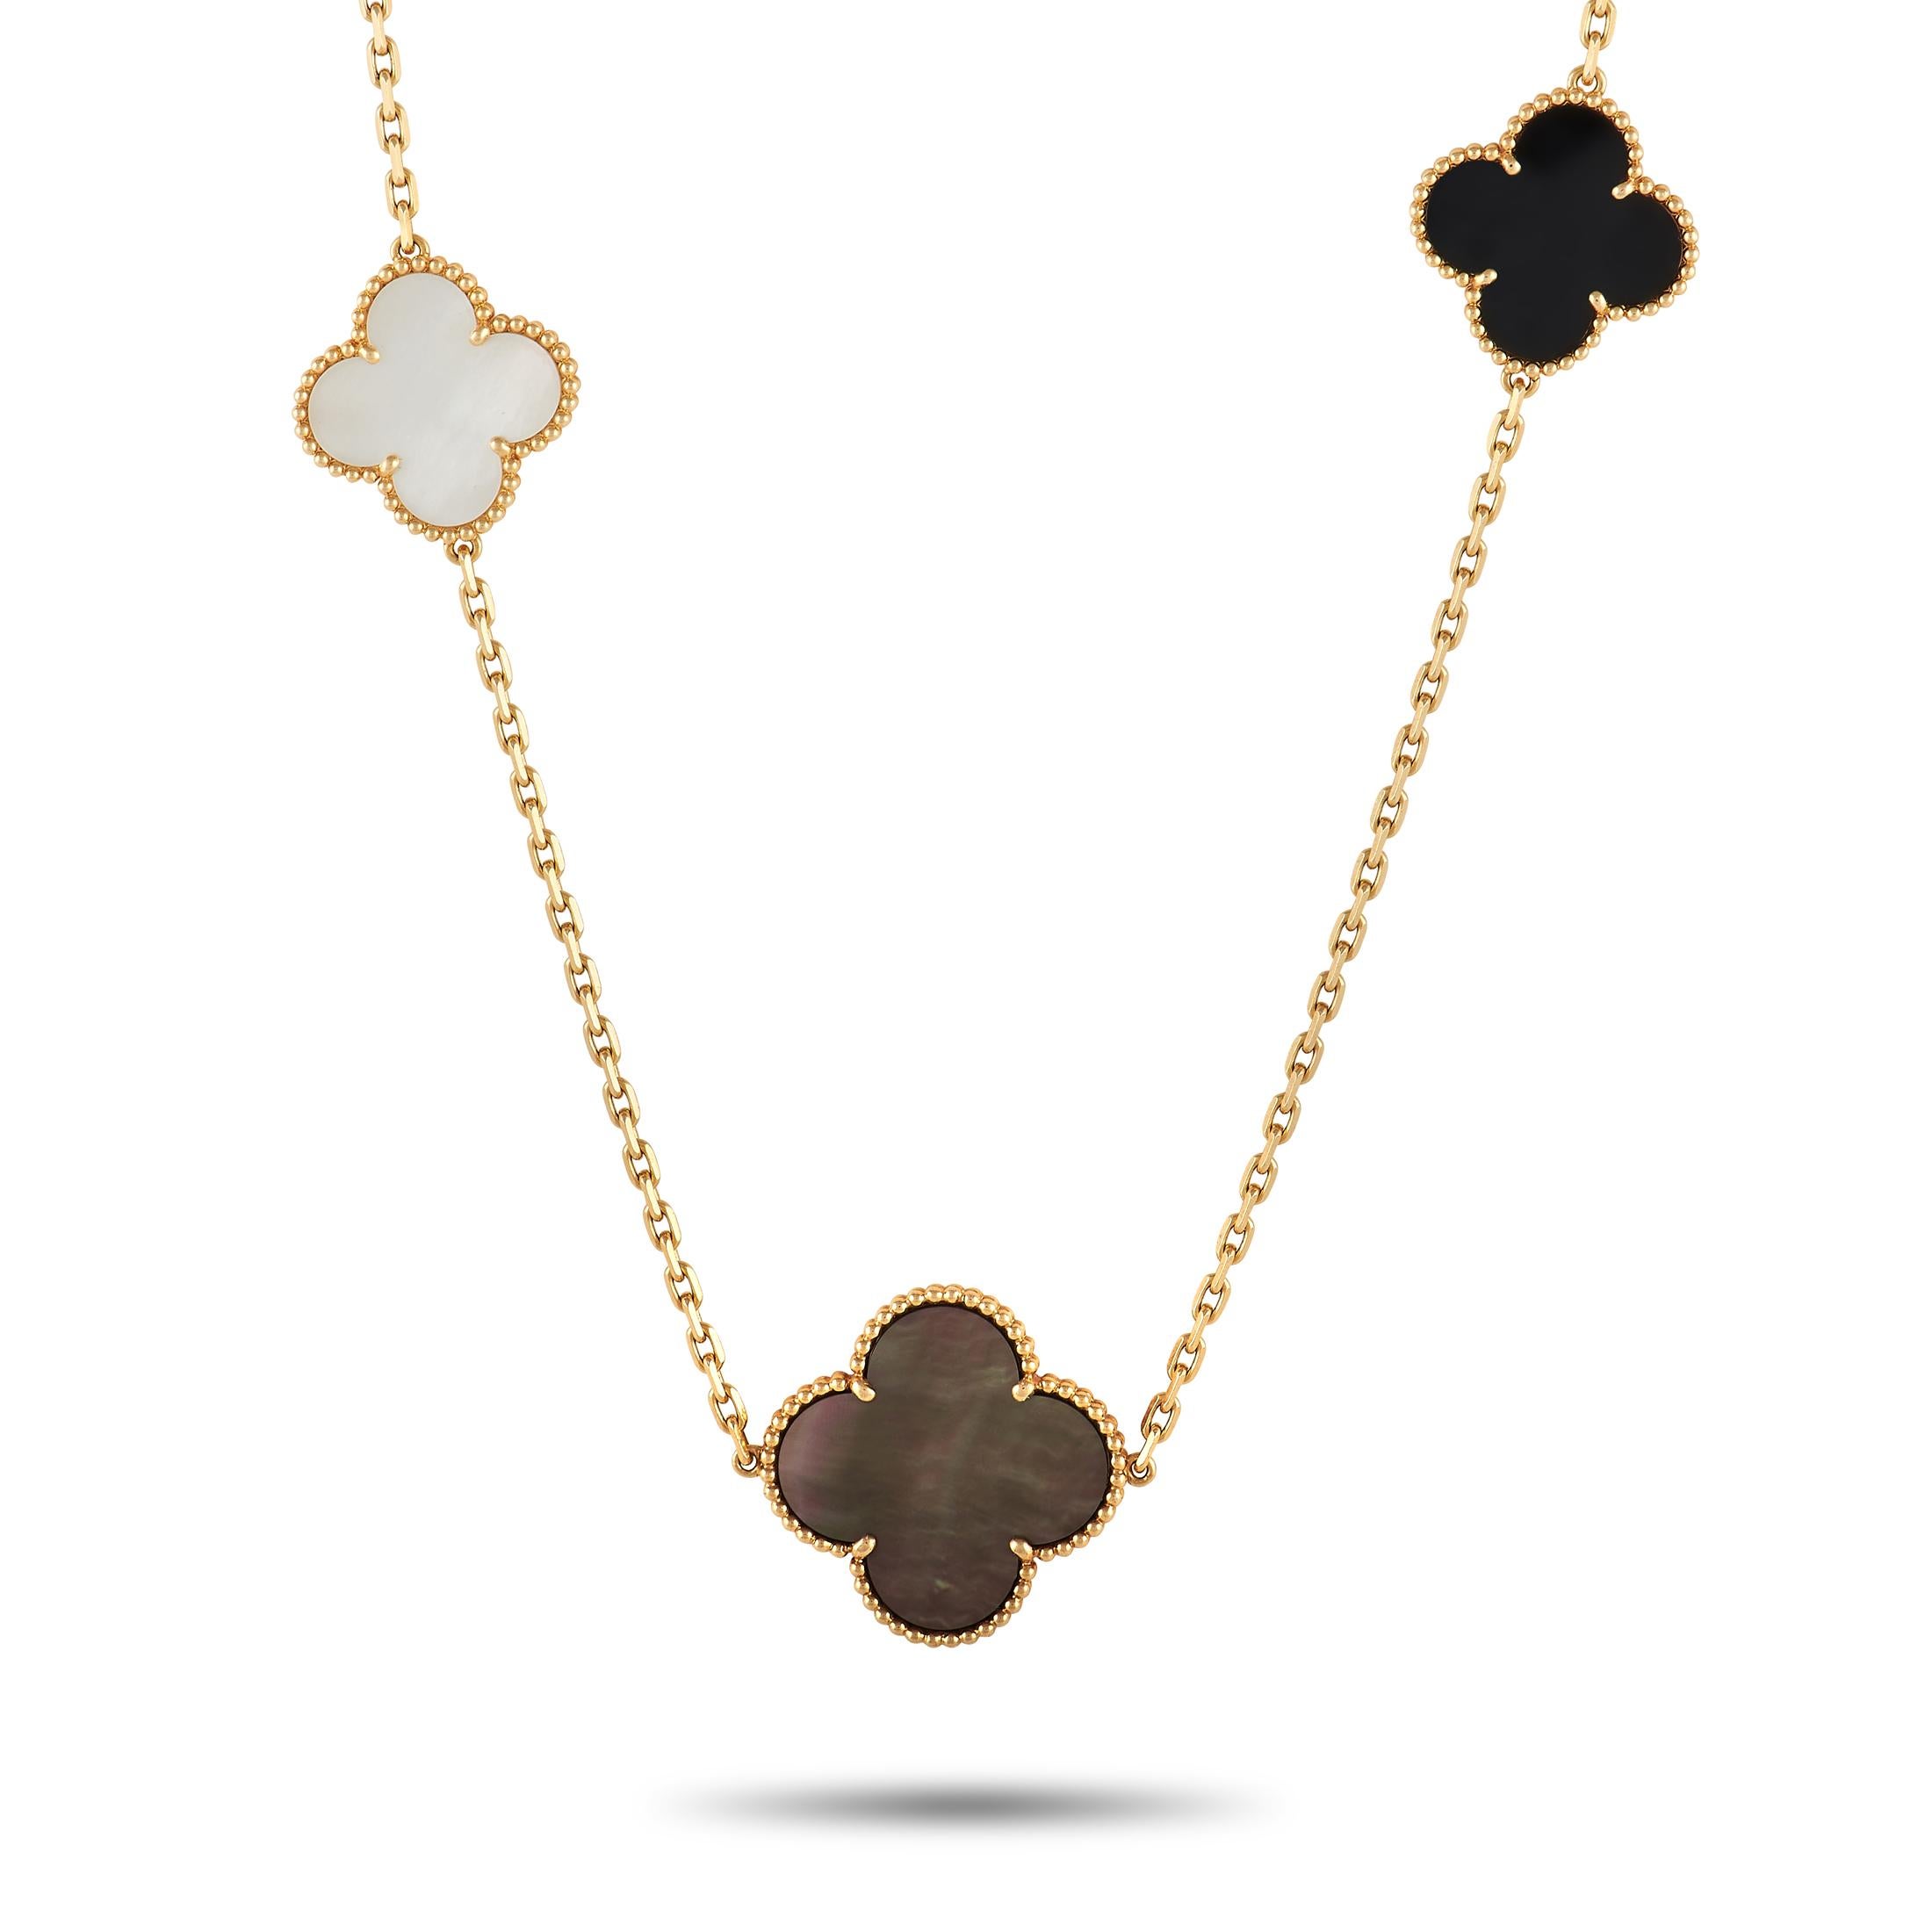 Add luxury to any ensemble with the help of this stunning 18K Yellow Gold Van Cleef & Arpels Magic Alhambra necklace. This elegant showpiece features a dramatic 48” chain that is accented by 16 of the brand’s iconic clover motifs. The inclusion of